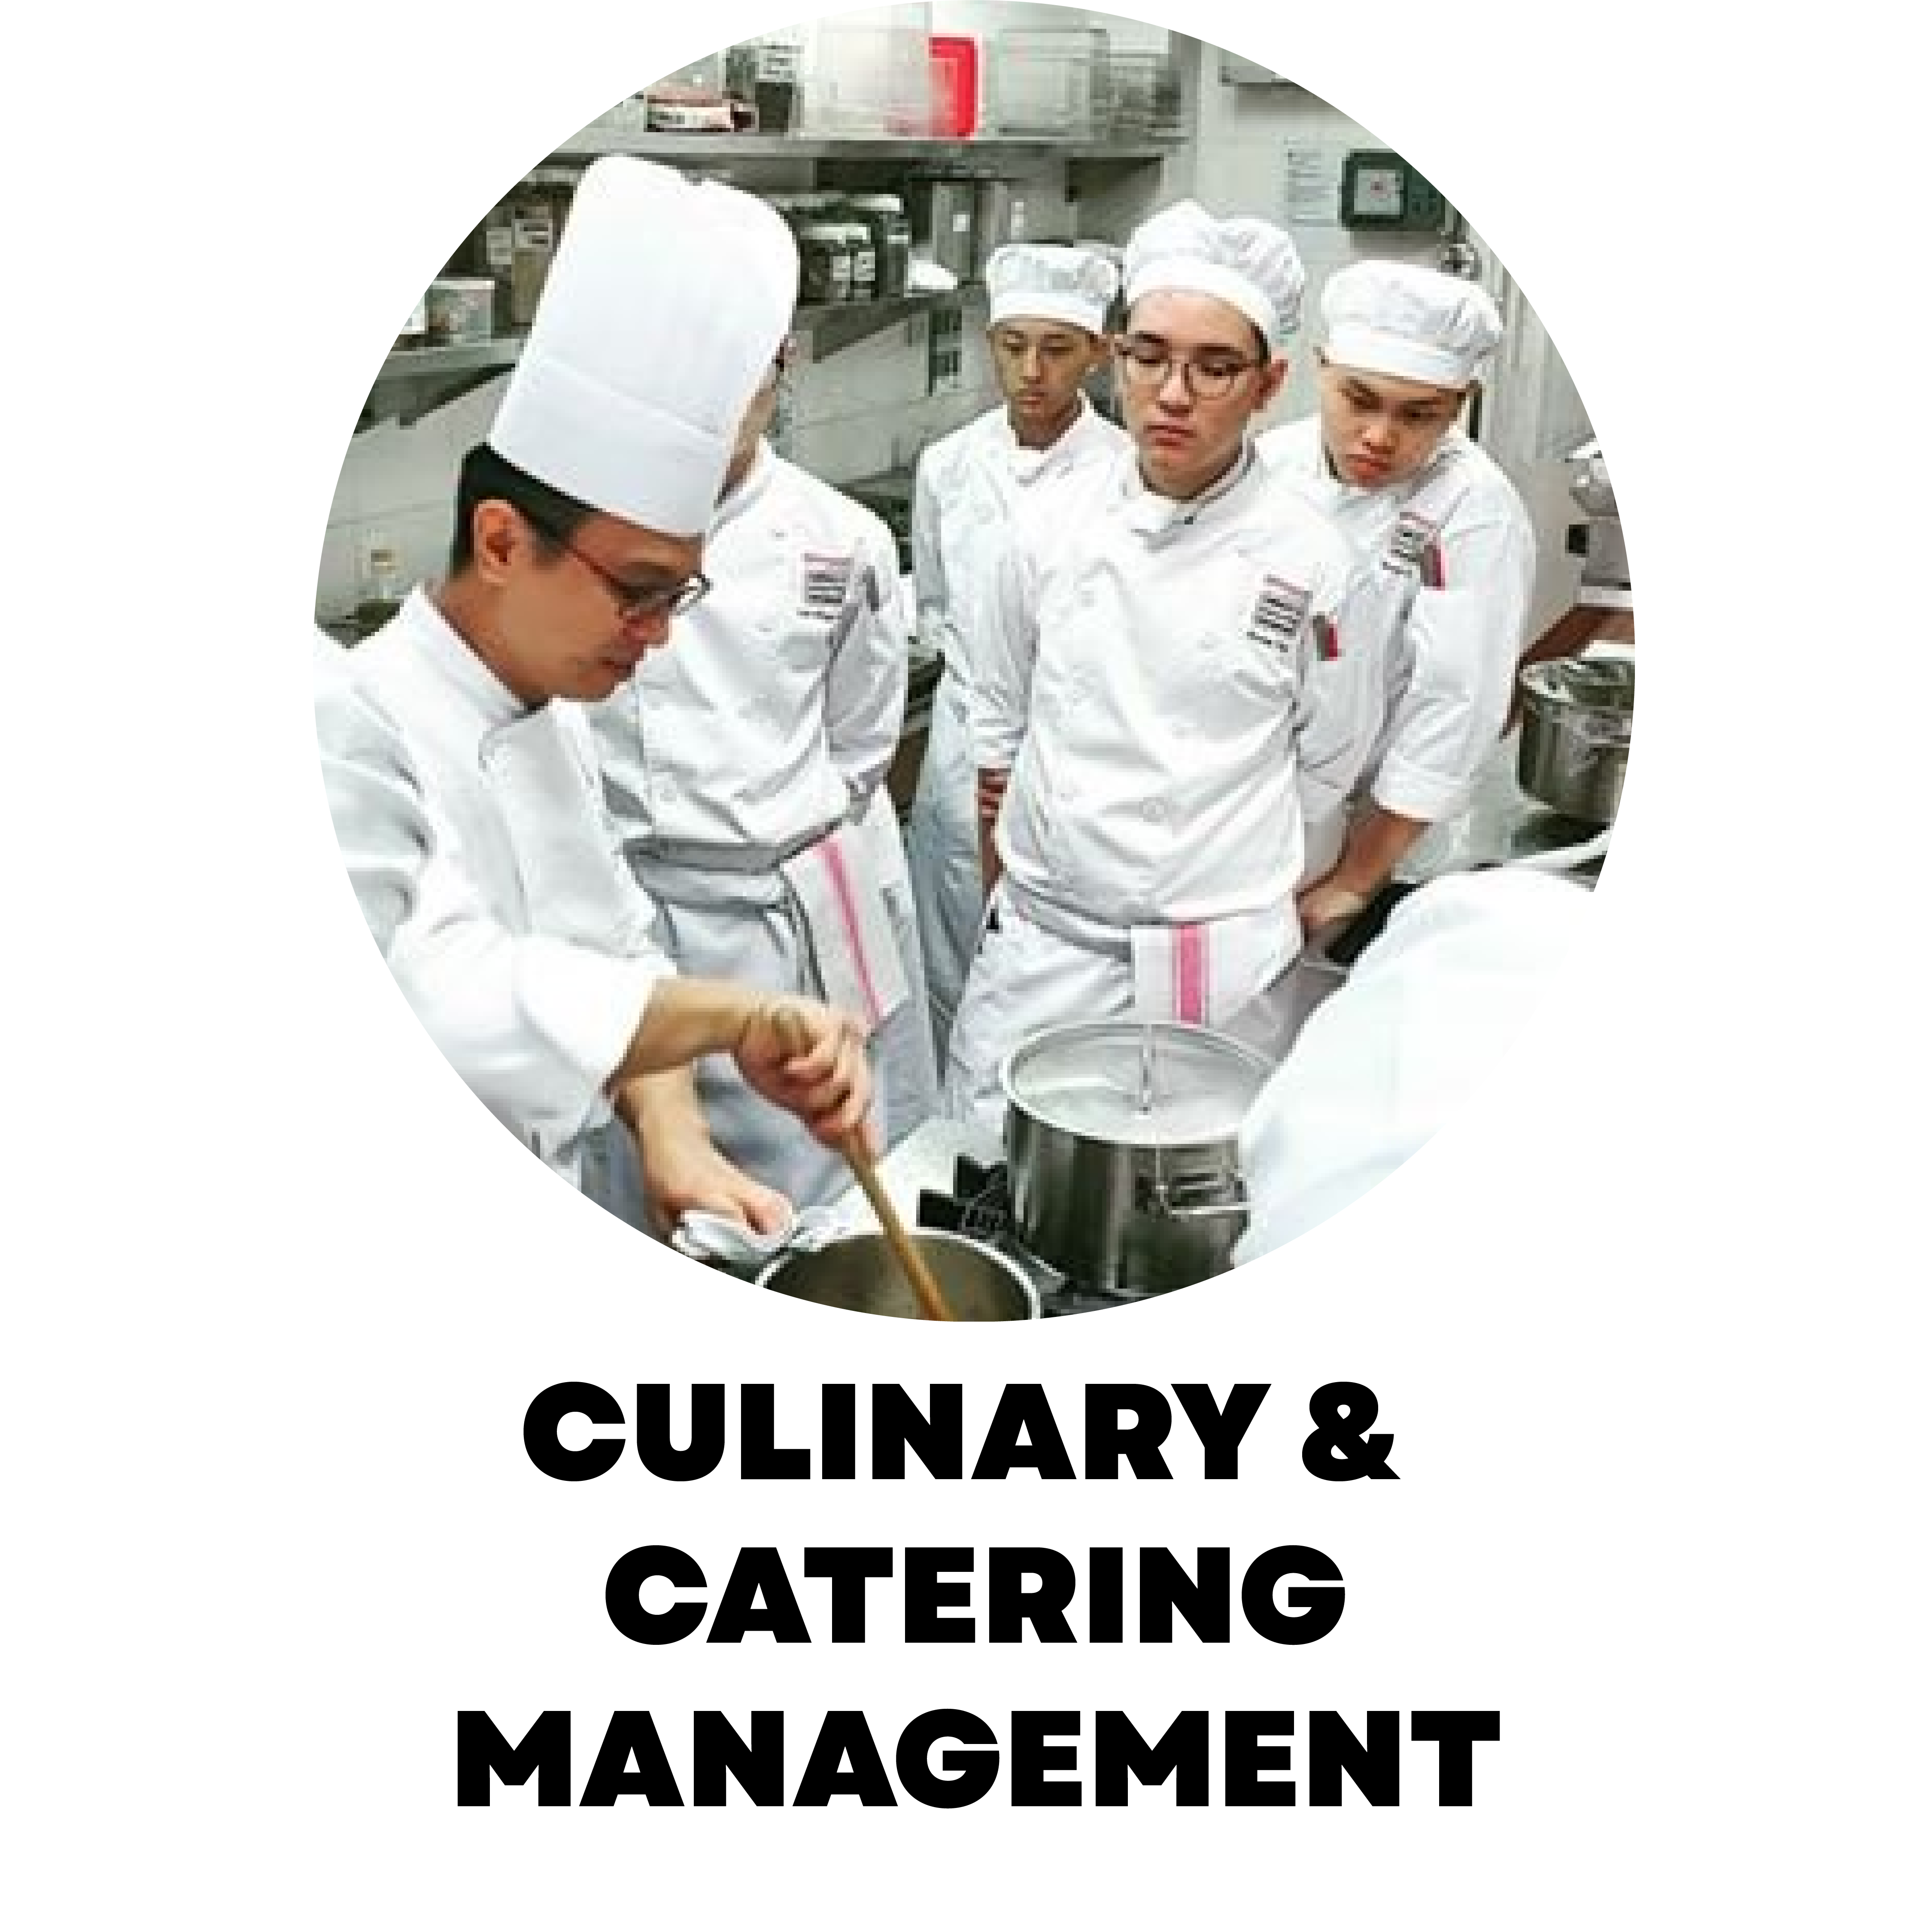 Culinary & Catering Management